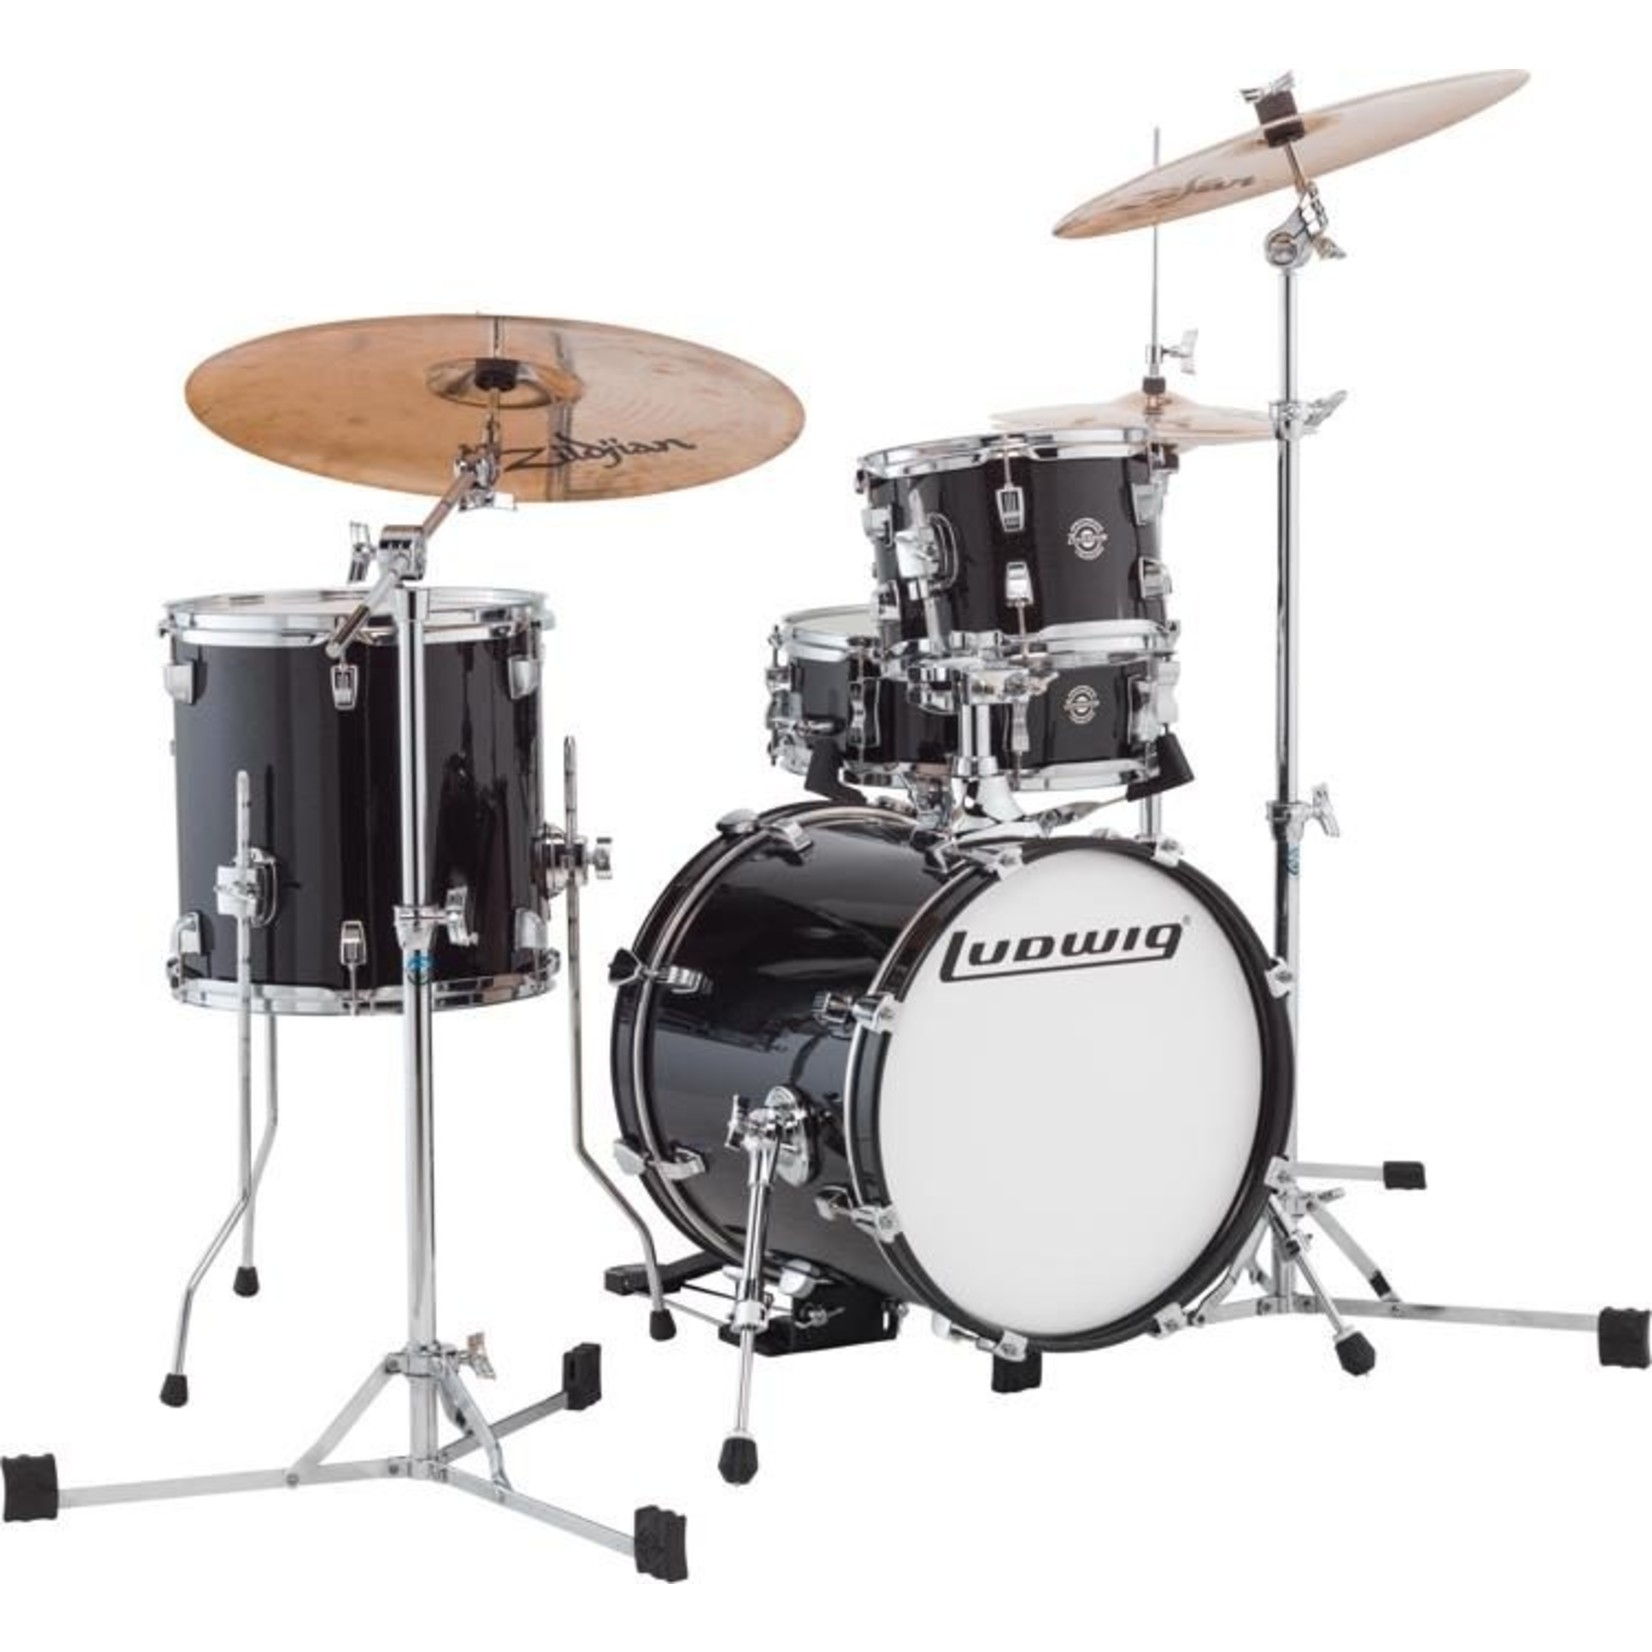 Ludwig Ludwig Breakbeats by Questlove “Black Sparkle”